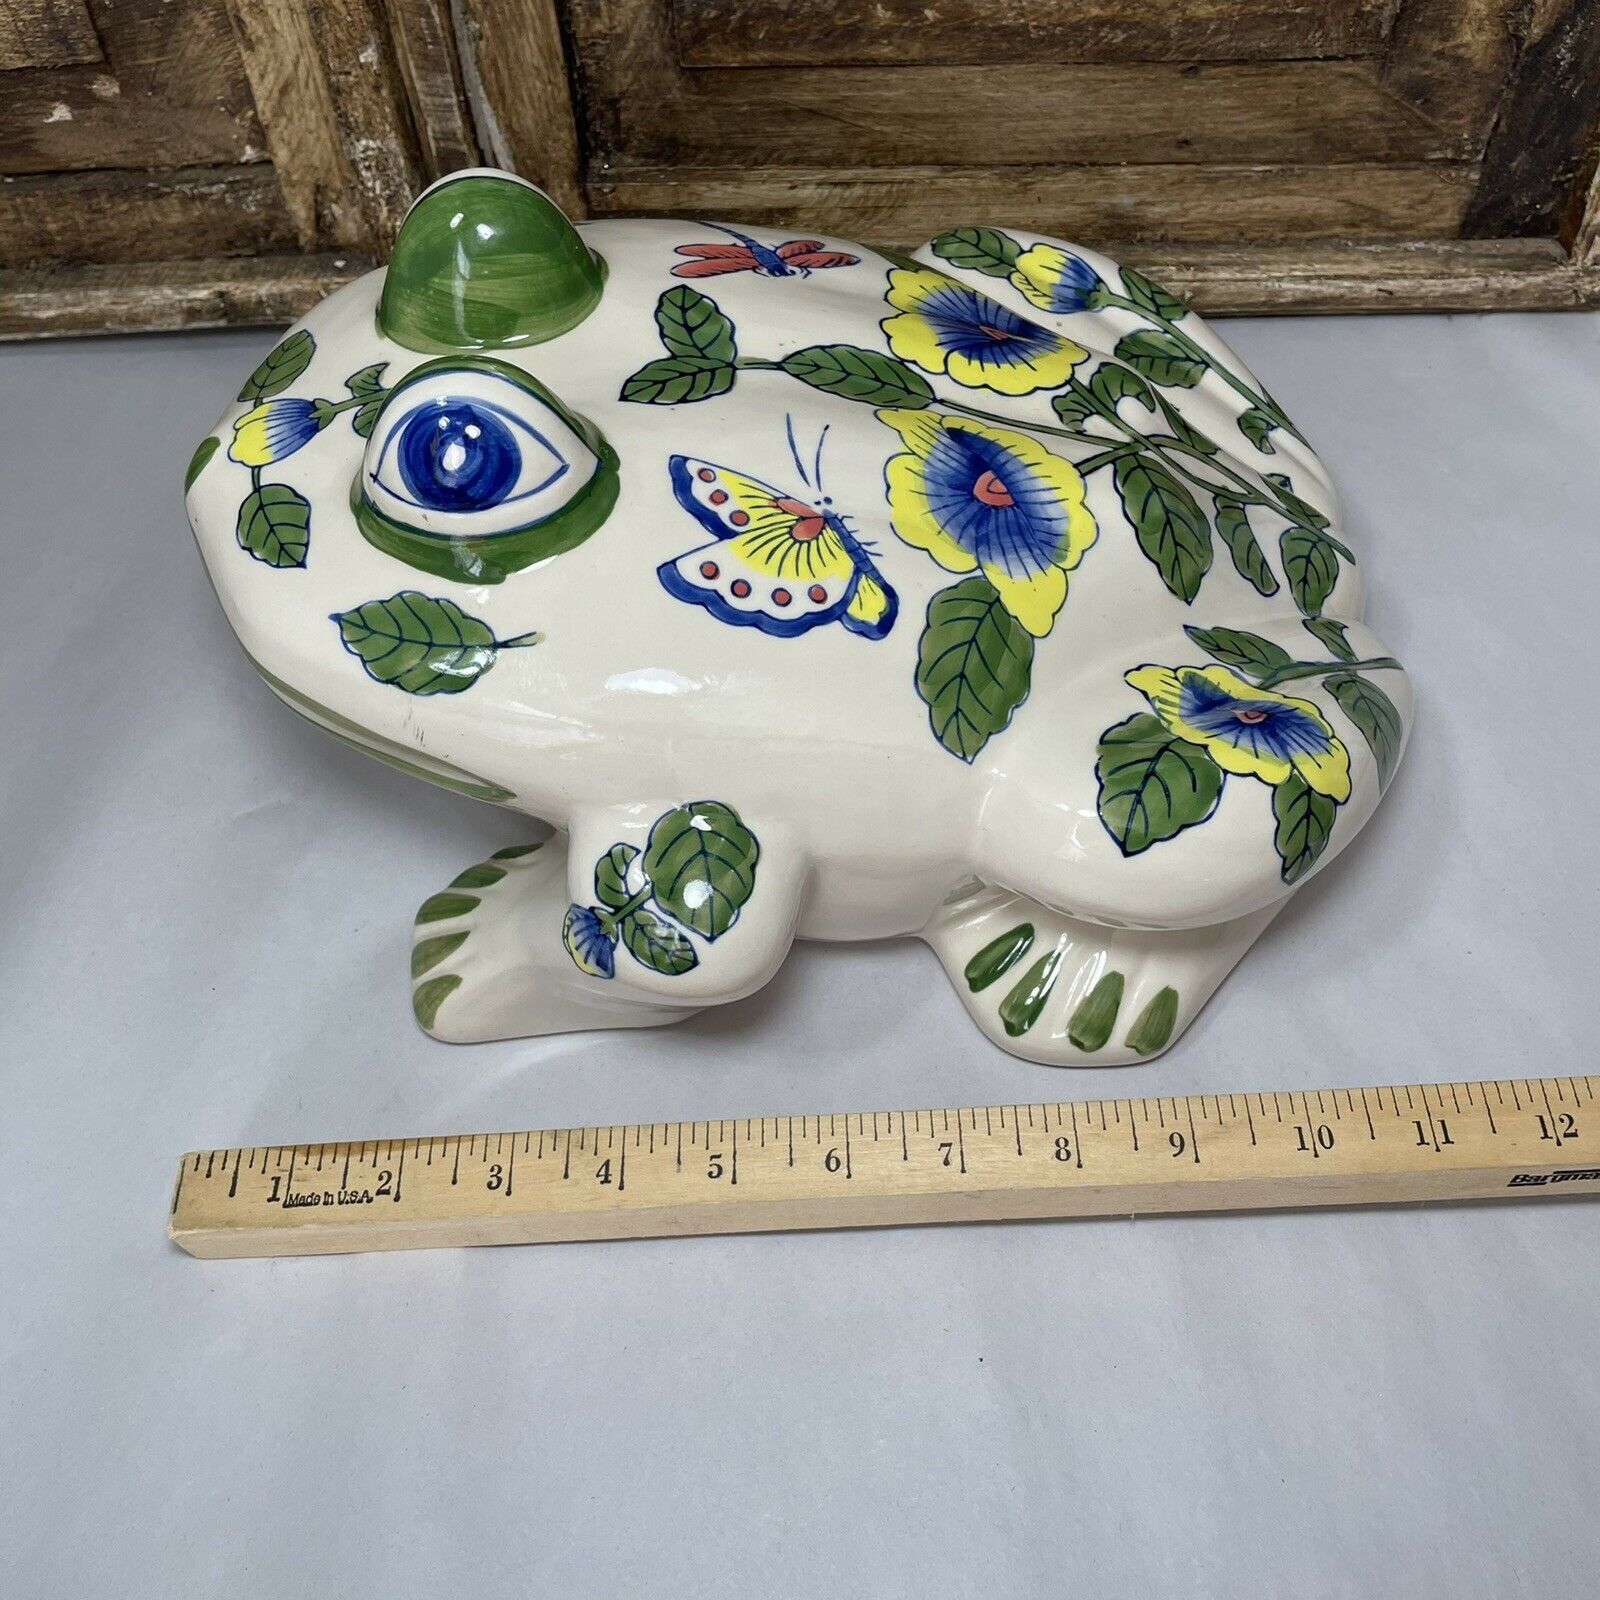 Vintage Hand Painted Decorative Frog Toad Ceramic Pottery Multicolored